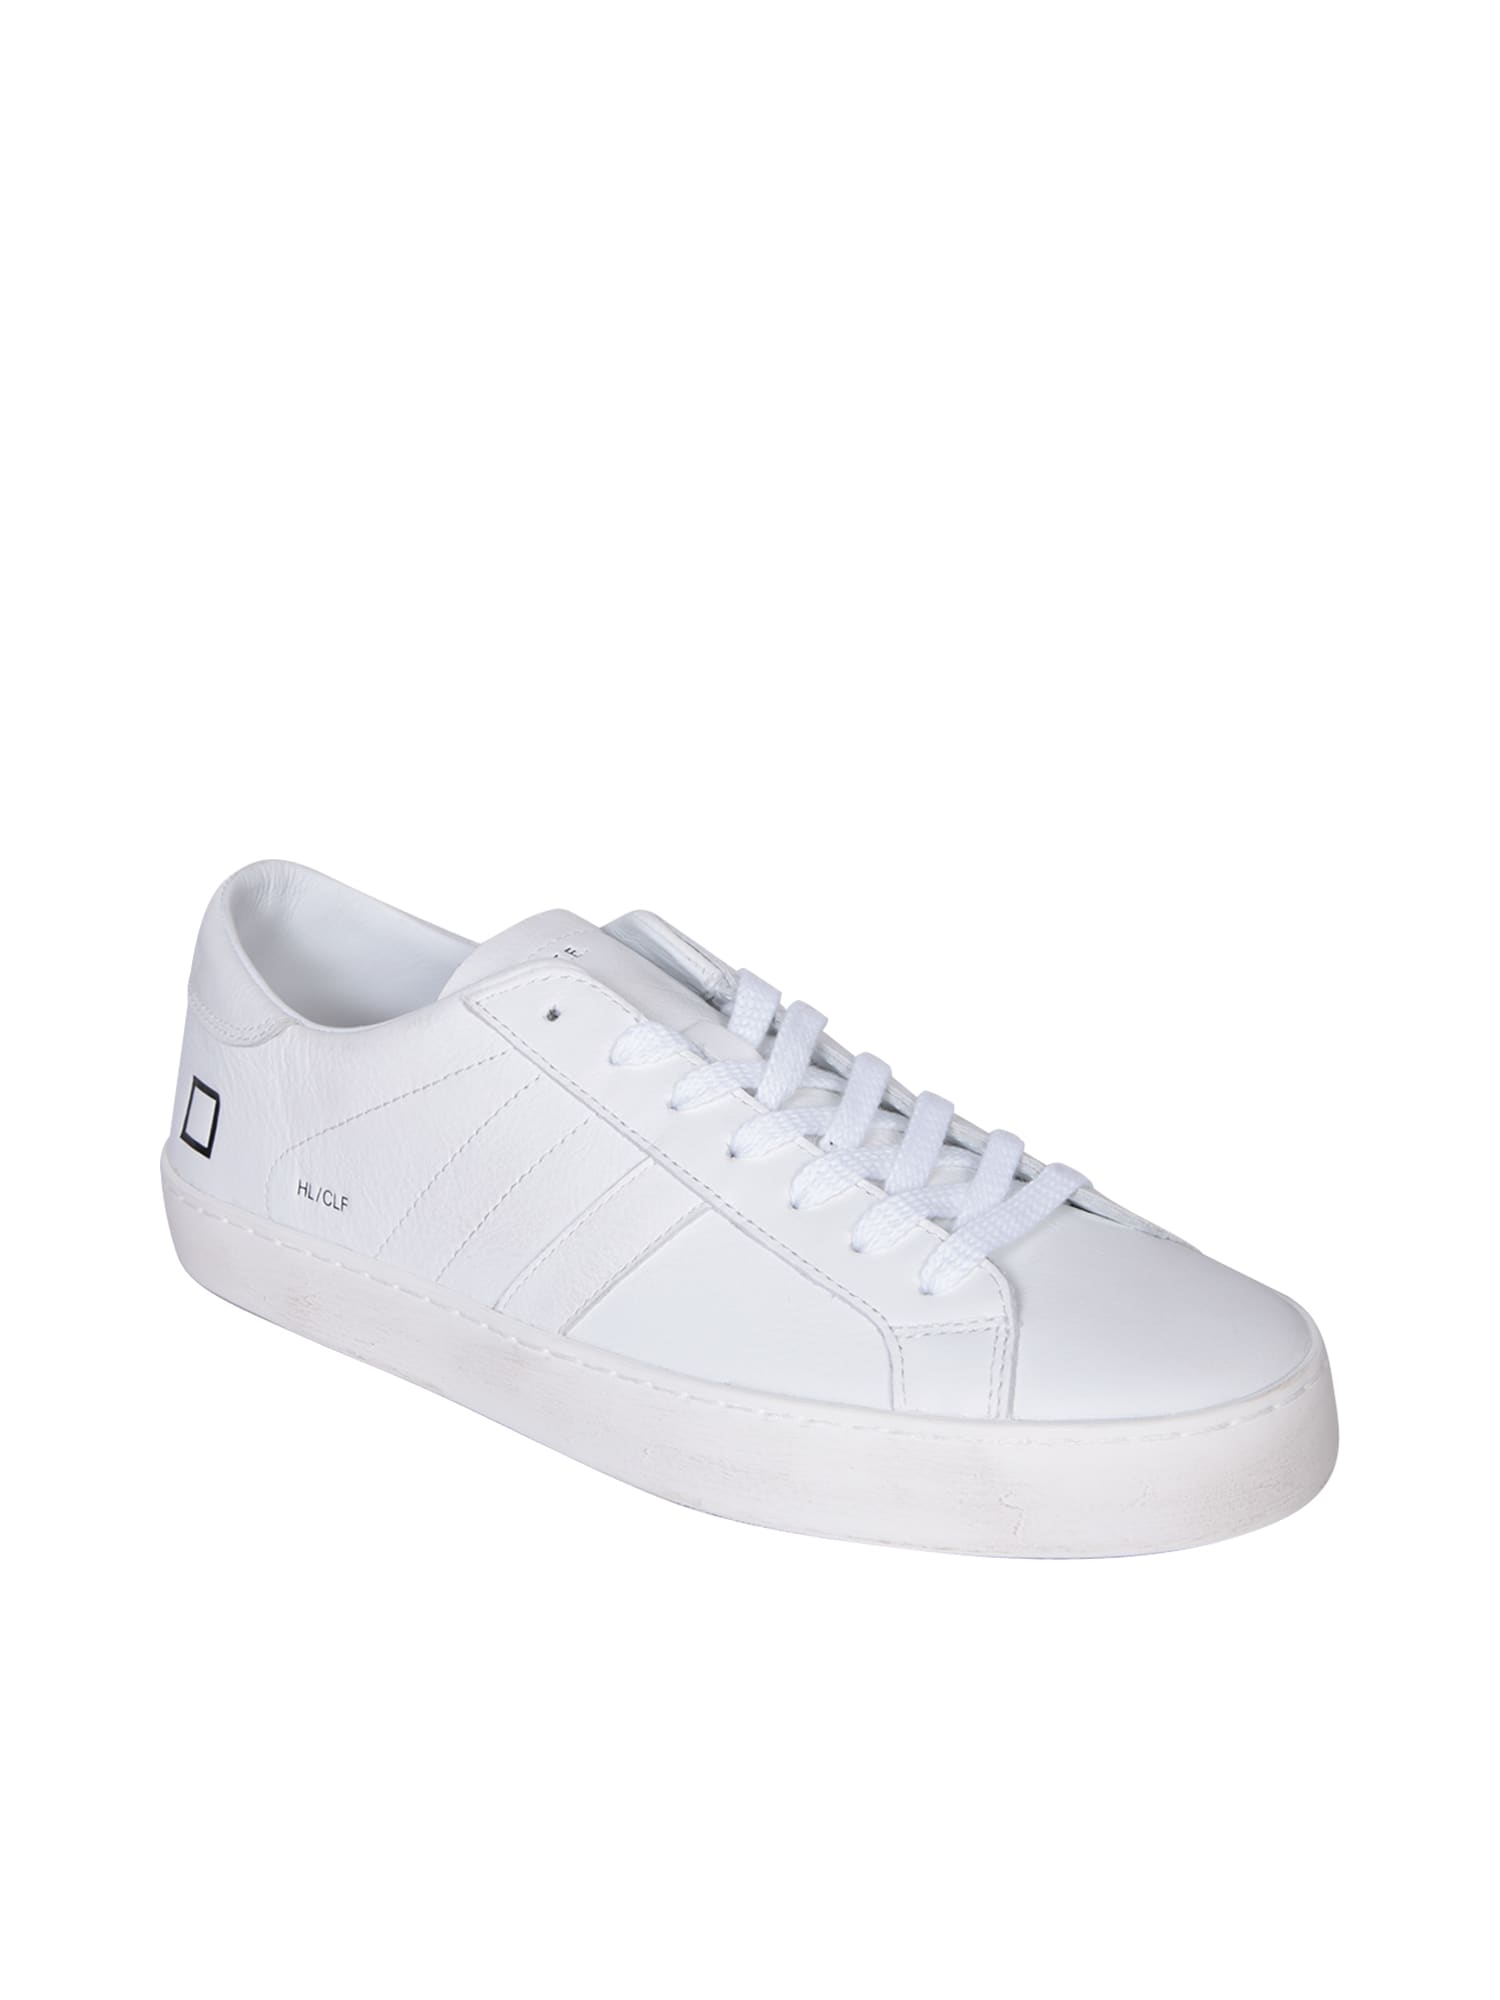 Shop Date Hill Low Calf Leather White Sneakers